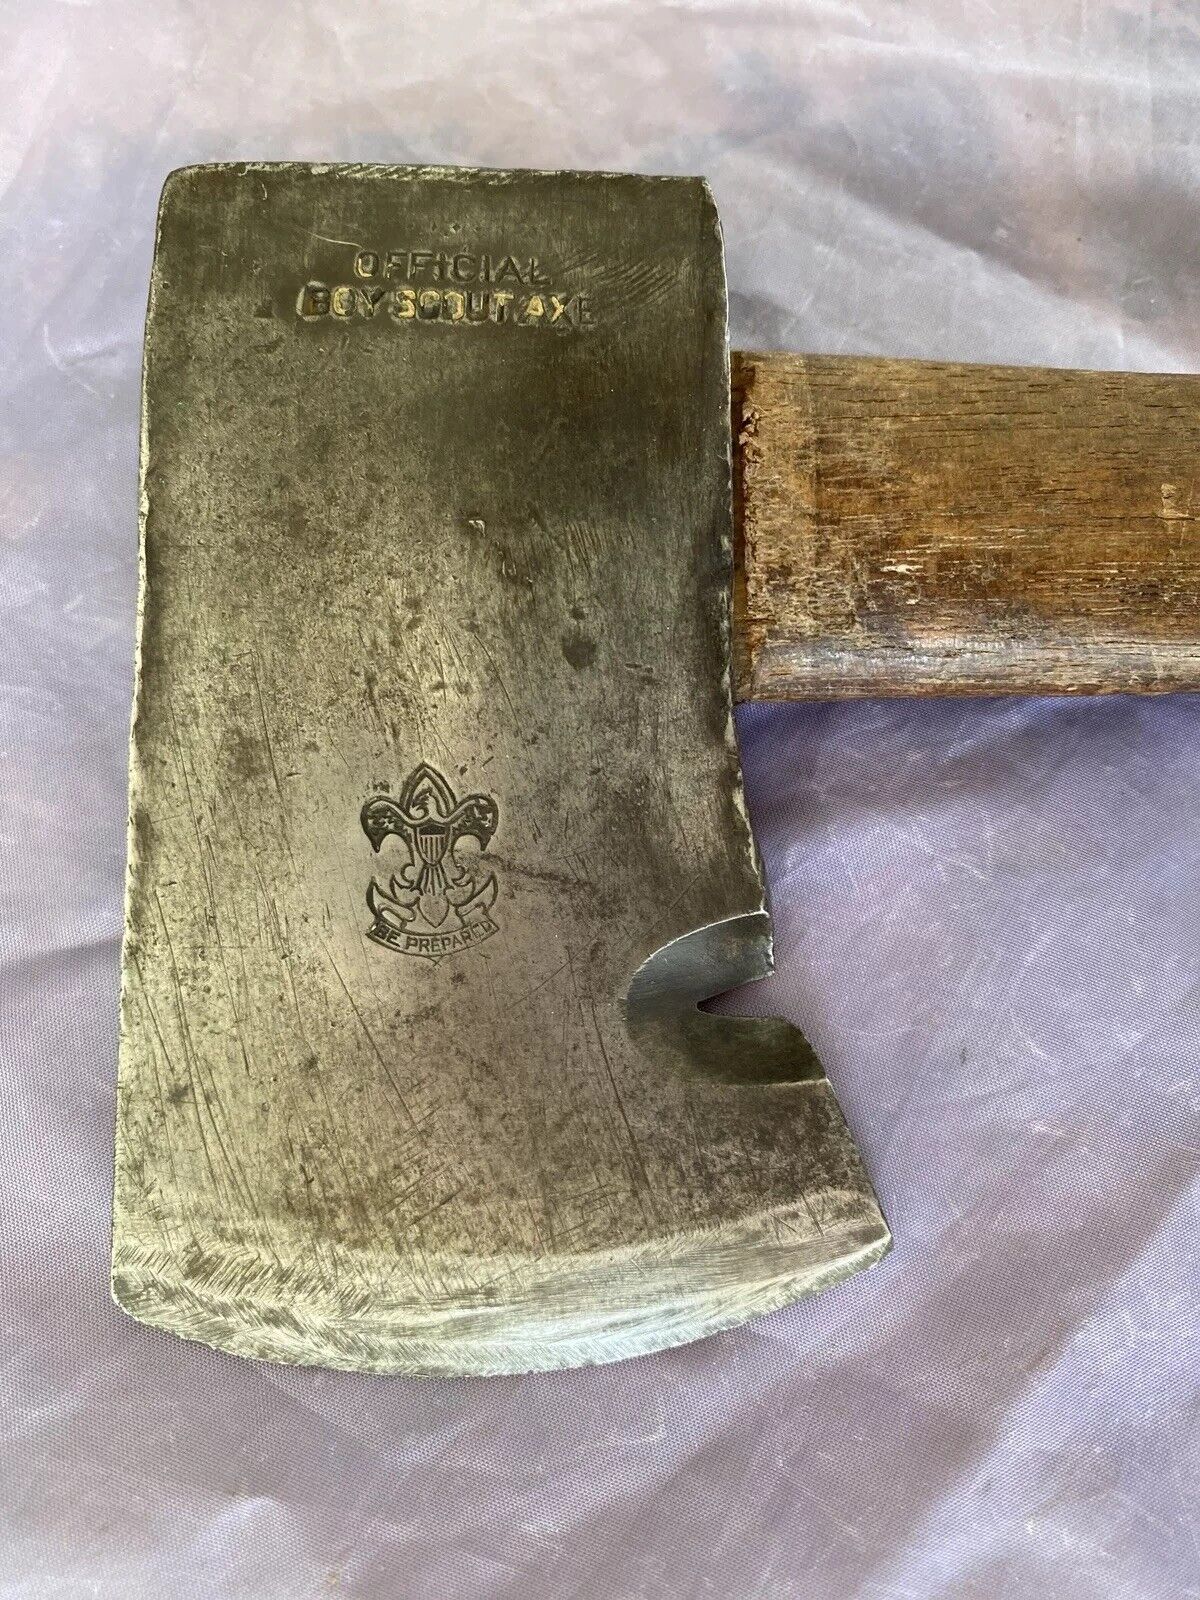 VINTAGE COLLINS OFFICAL BOY SCOUT HATCHET - VERY GOOD COND